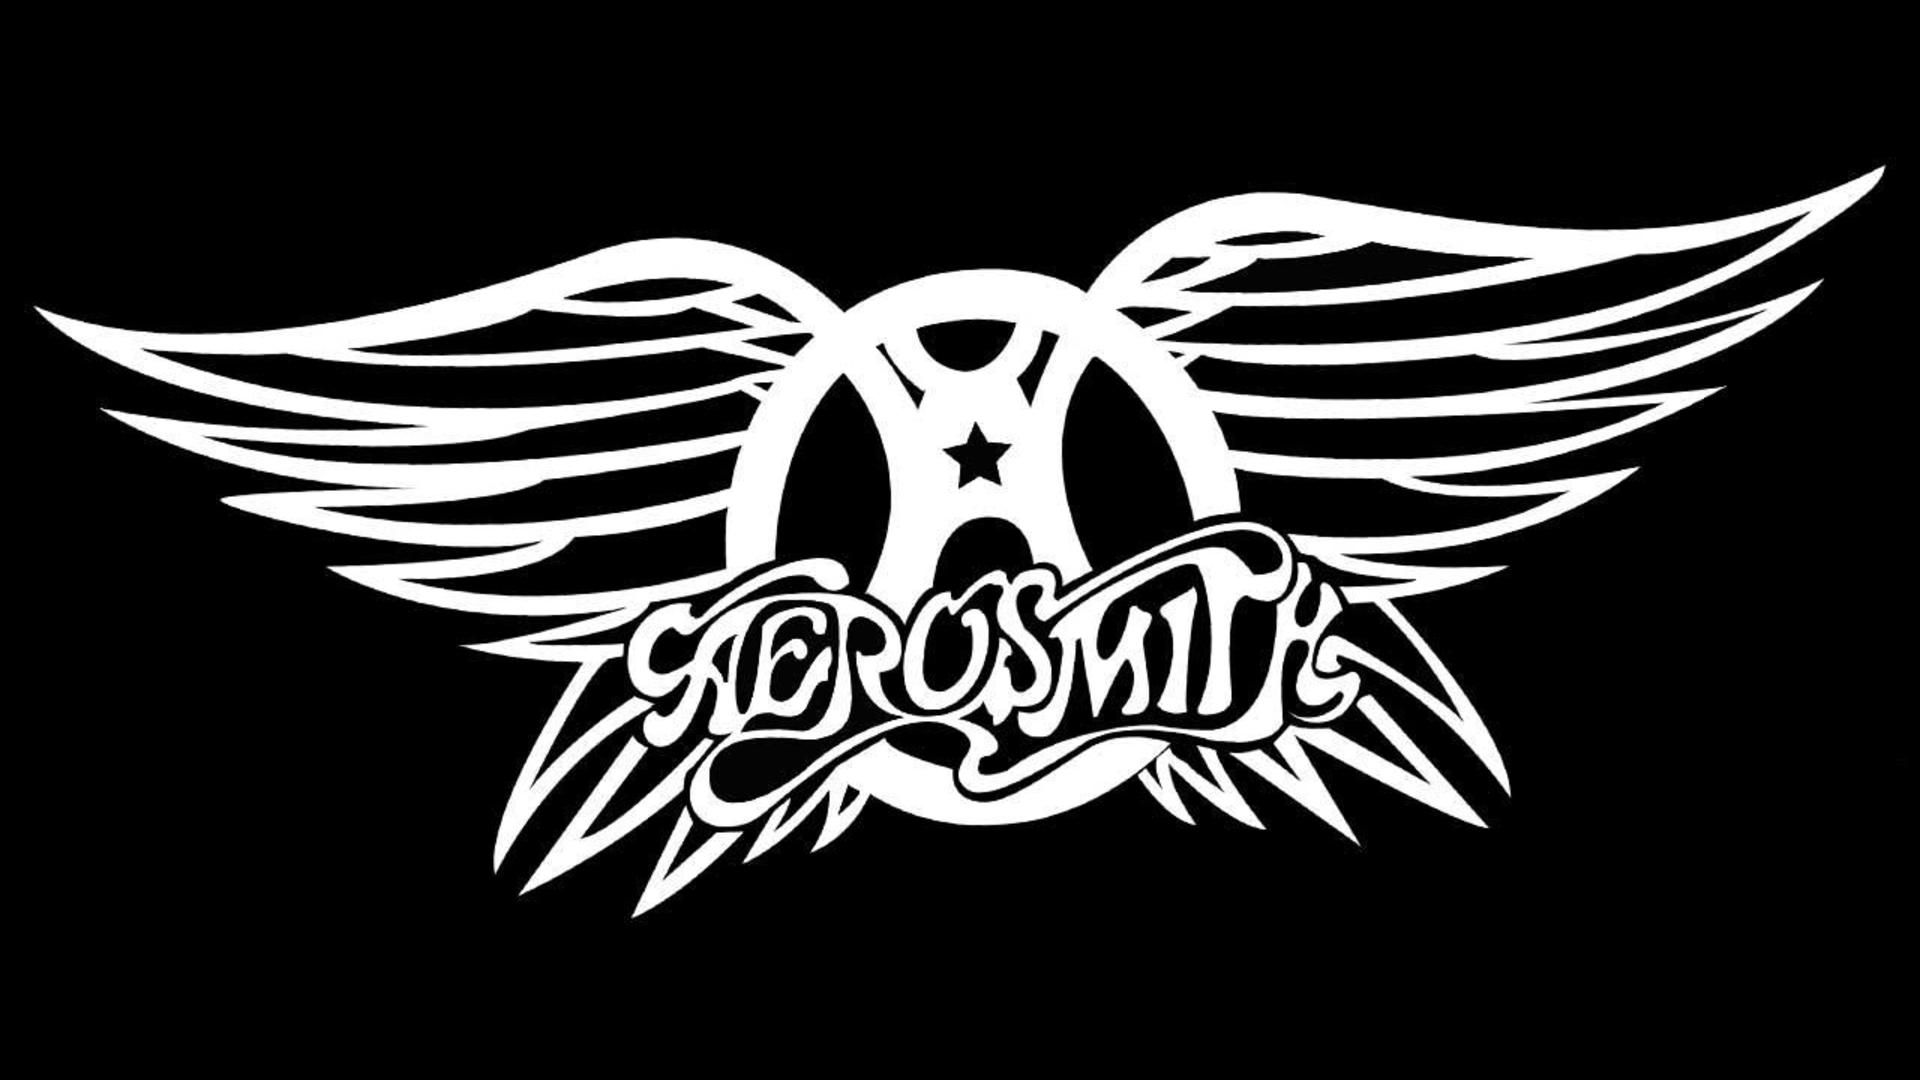 Aerosmith Logo Jpg Aerosmith Logo Png - Aerosmith Record Vector, Transparent background PNG HD thumbnail